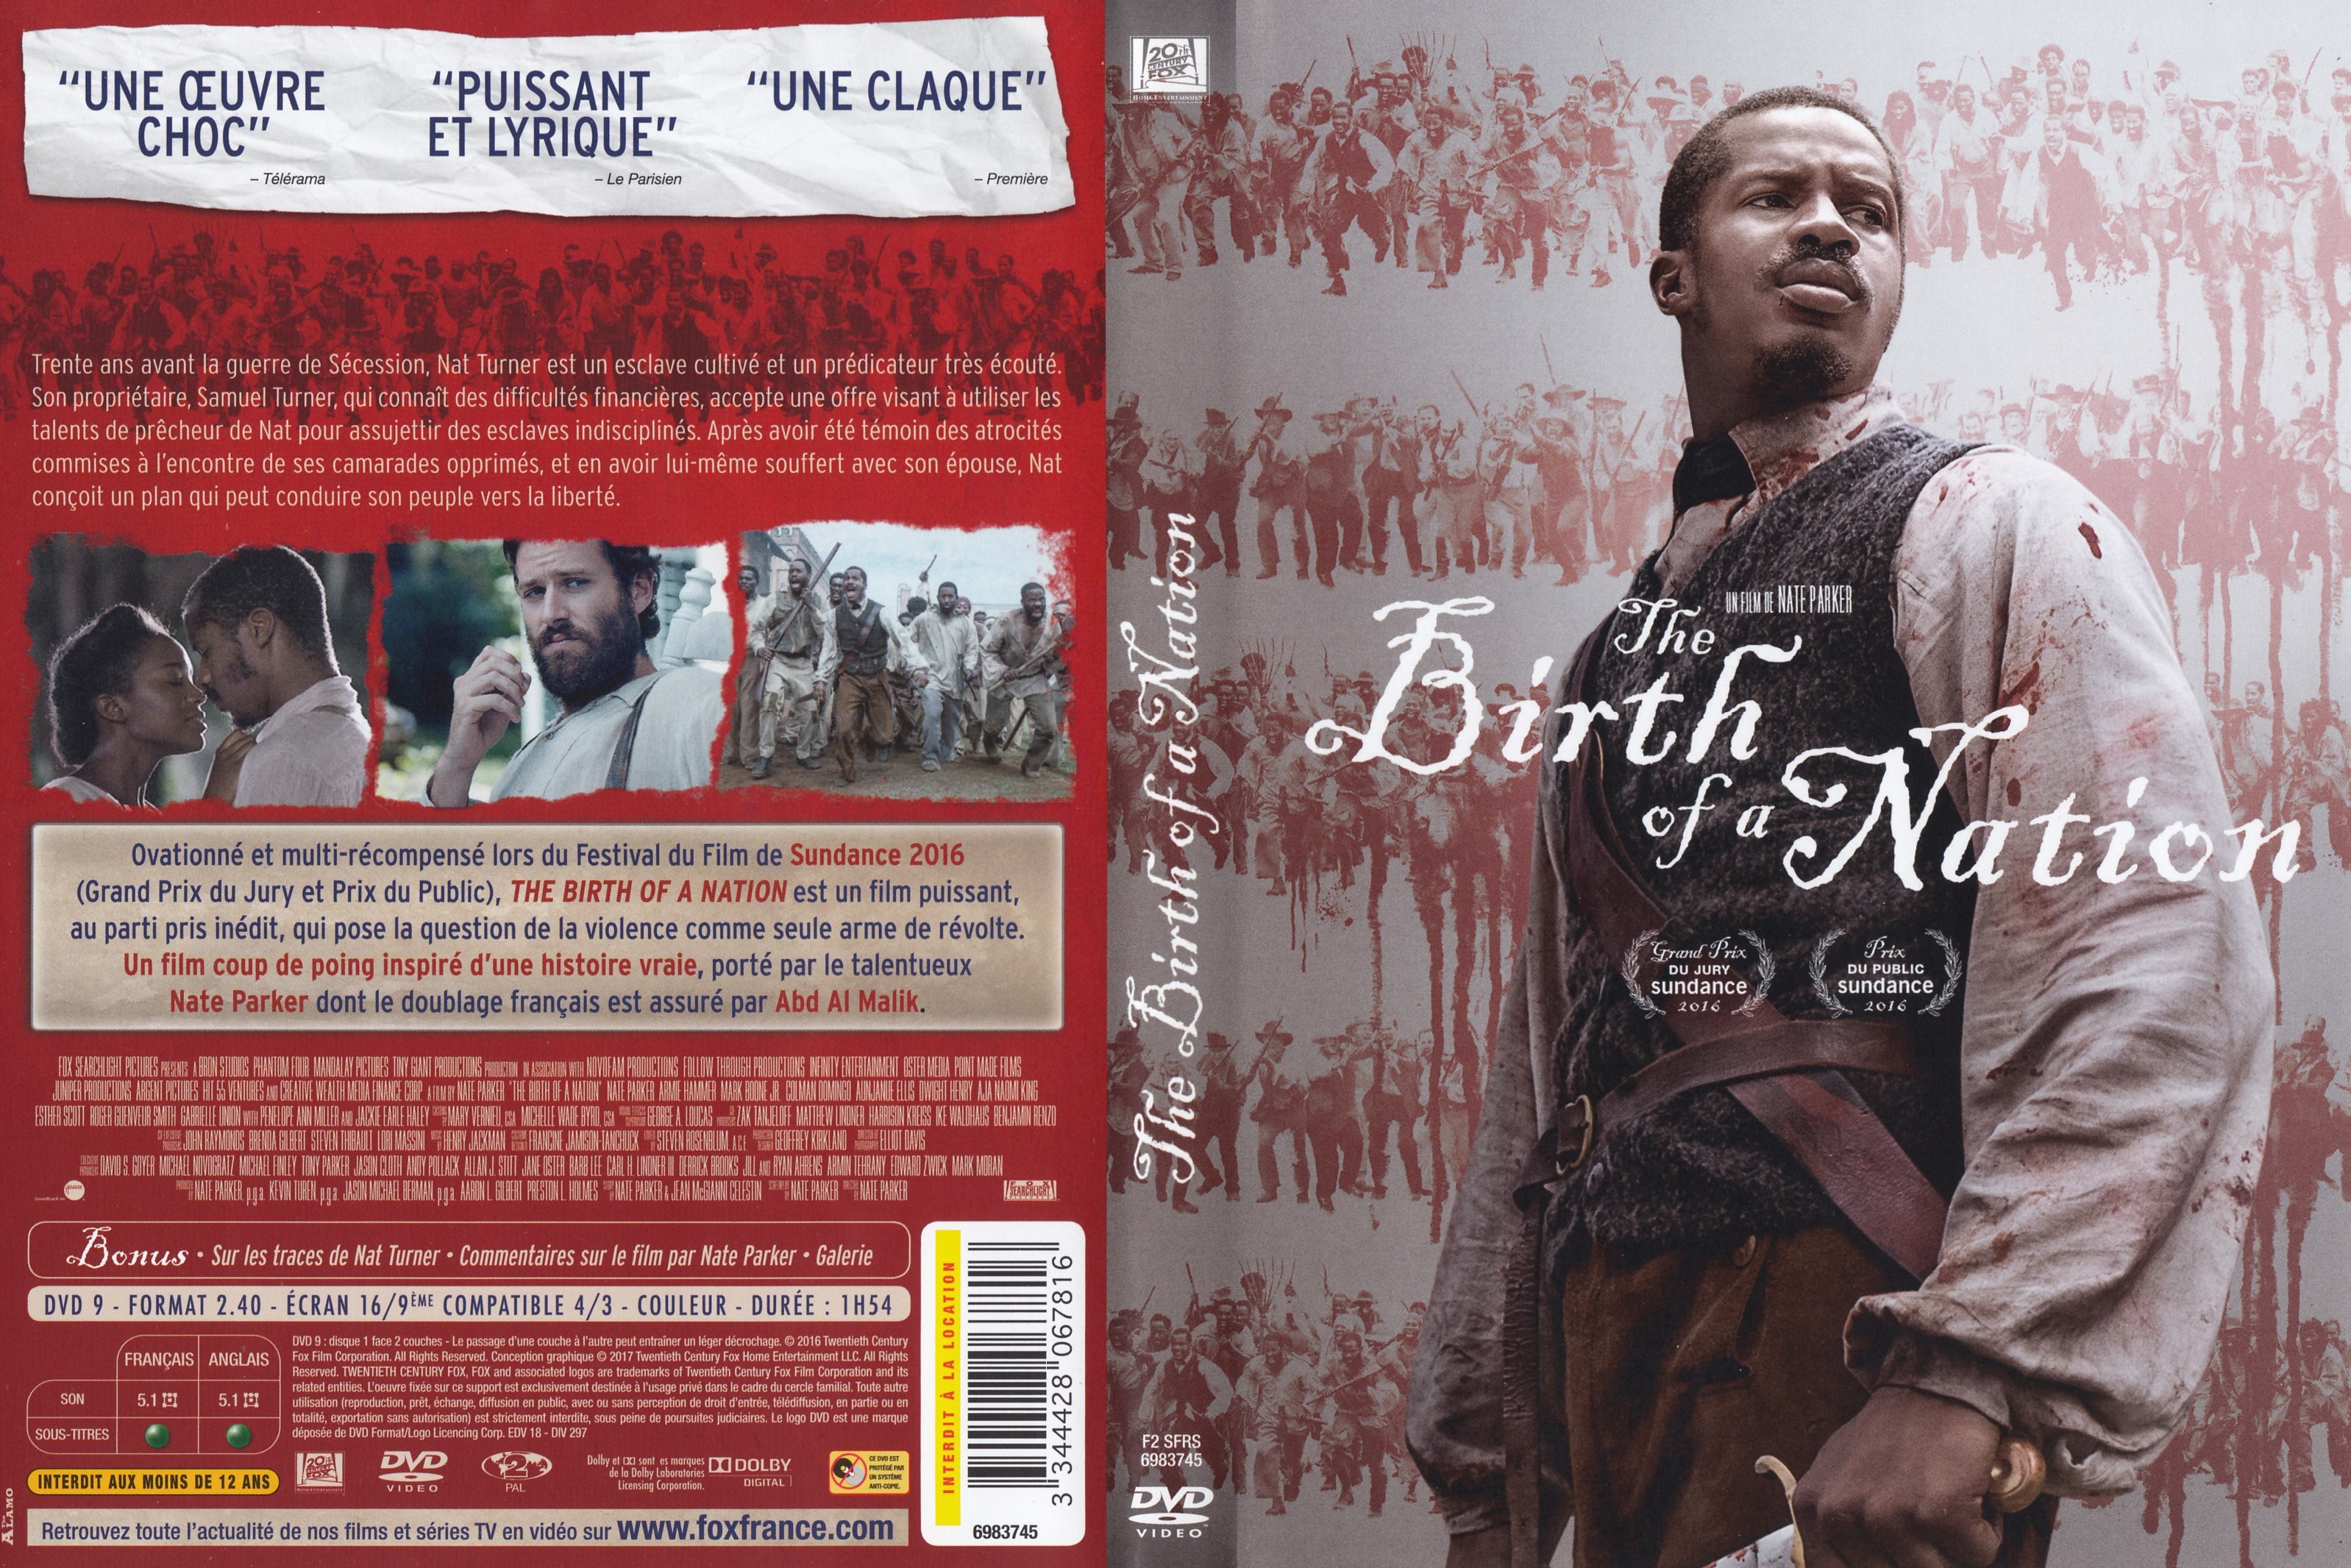 Jaquette DVD The Birth of a Nation